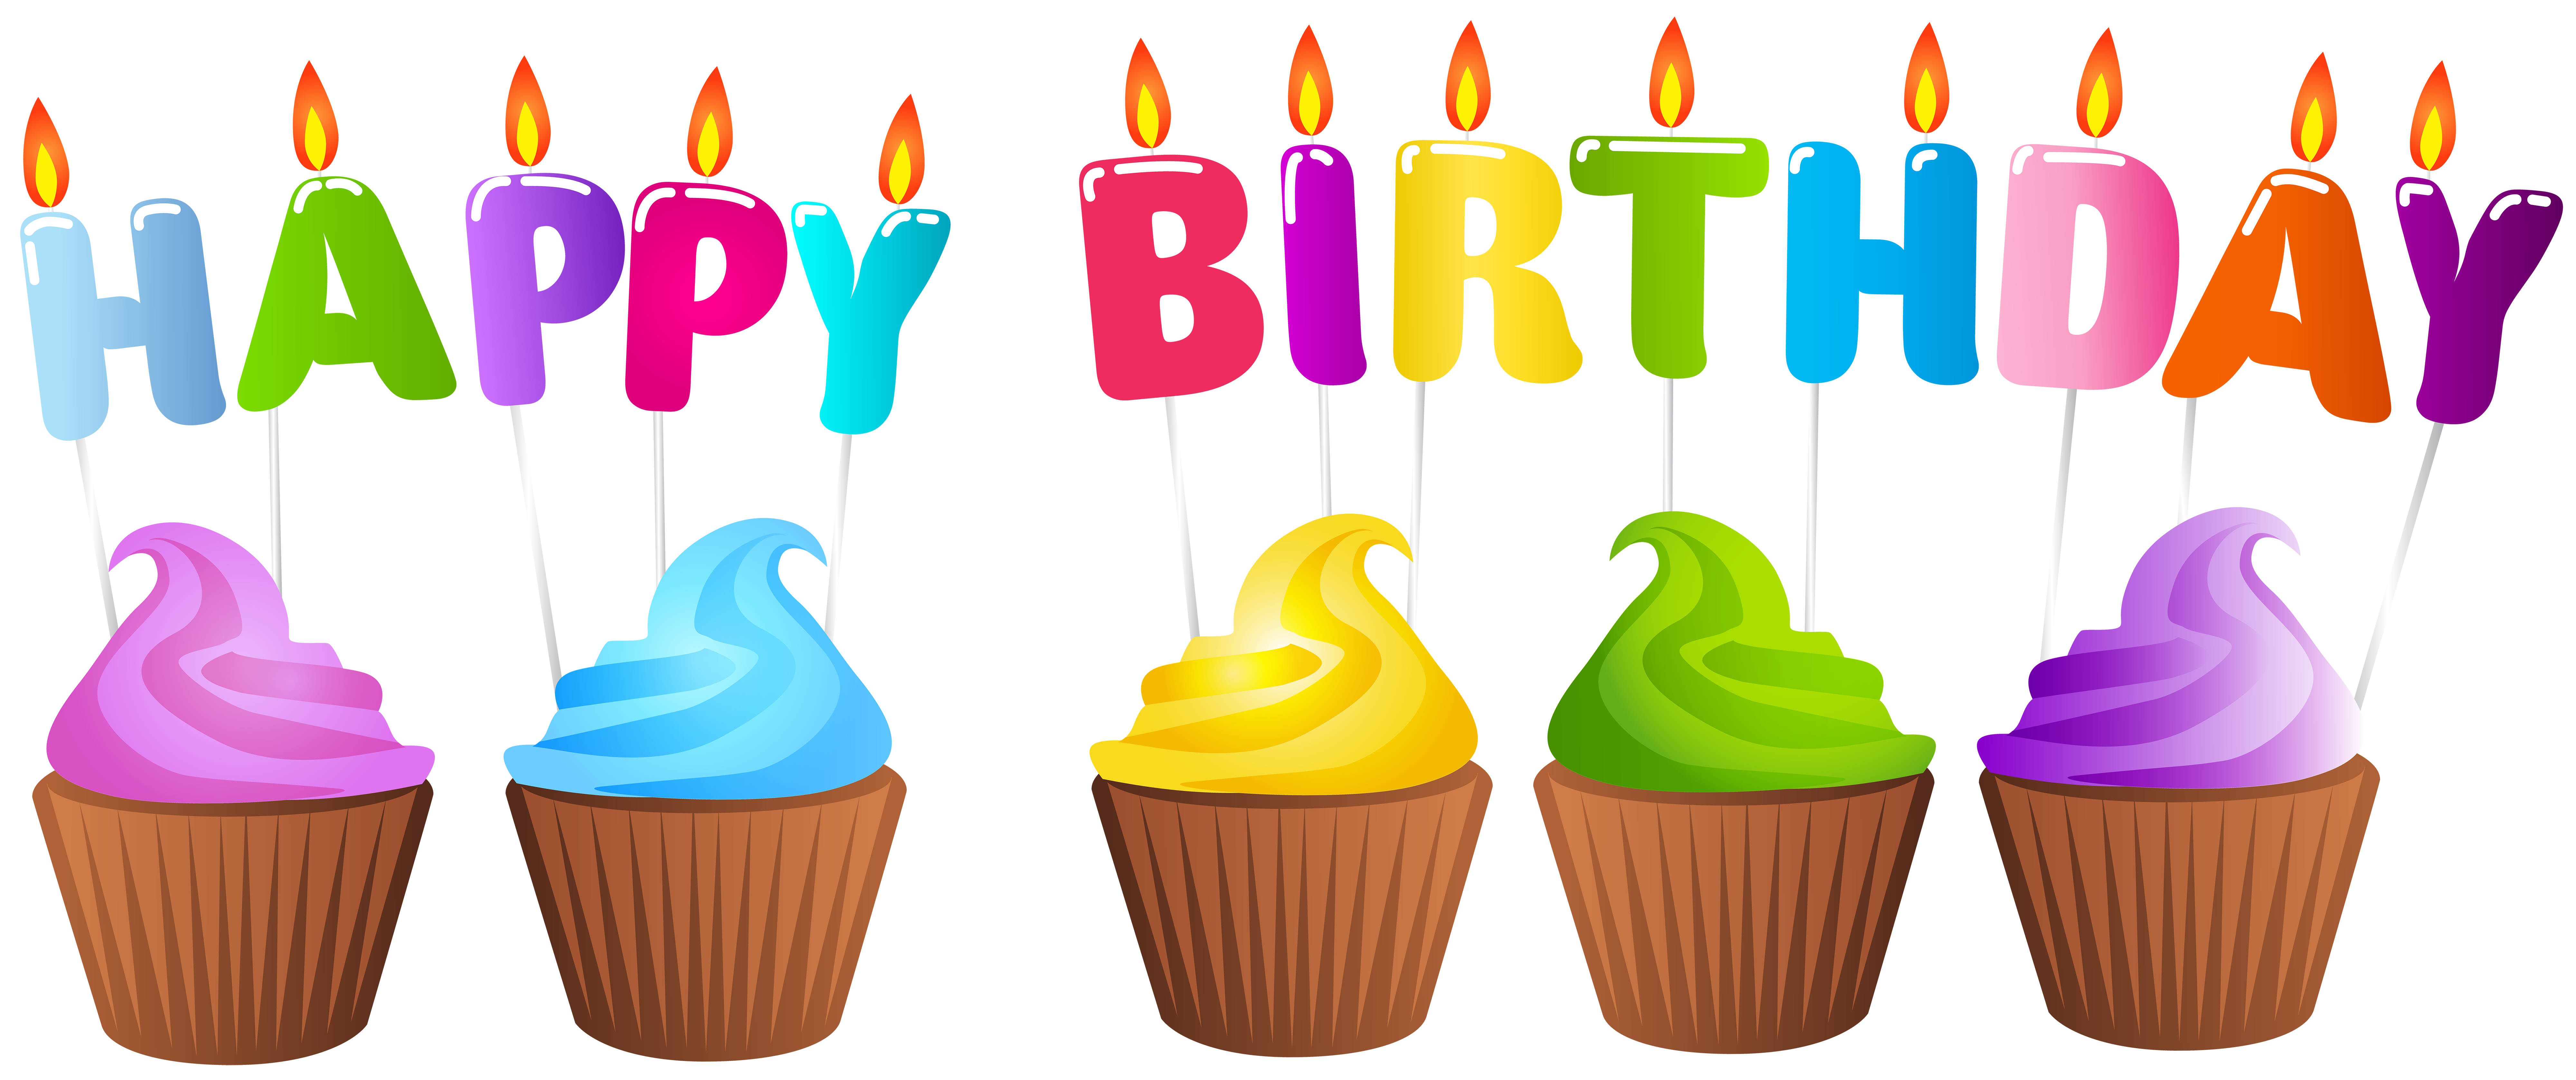 Happy Birthday Muffins PNG Clip Art Image Gallery Yopriceville.